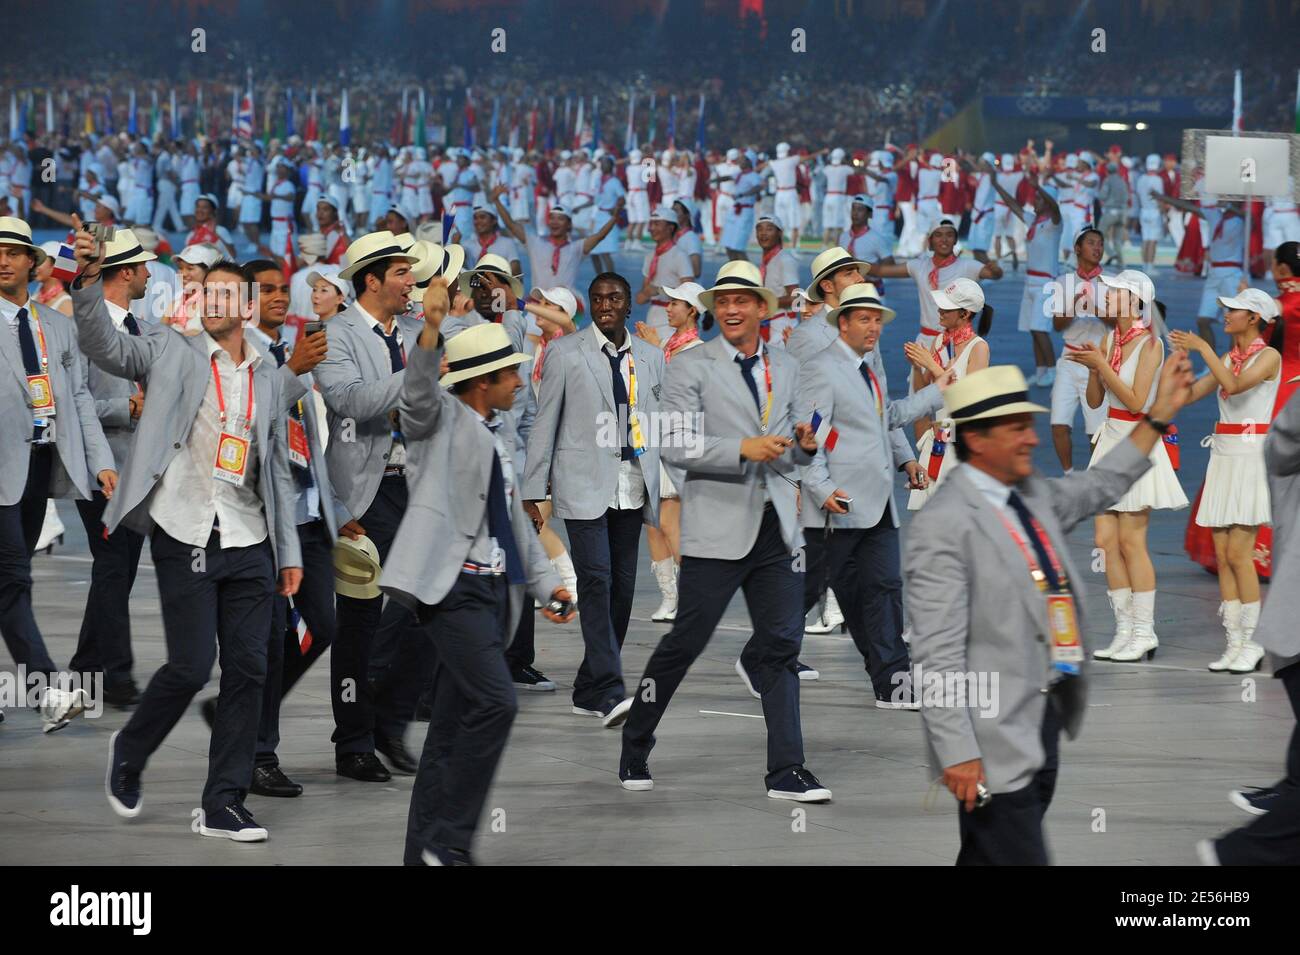 The French delegation during the Opening Ceremony for the 2008 Beijing Summer Olympics at the National Stadium in Beijing, China on August 8, 2008. Photo by Jean-Michel Psaila/ABACAPRESS.COM Stock Photo